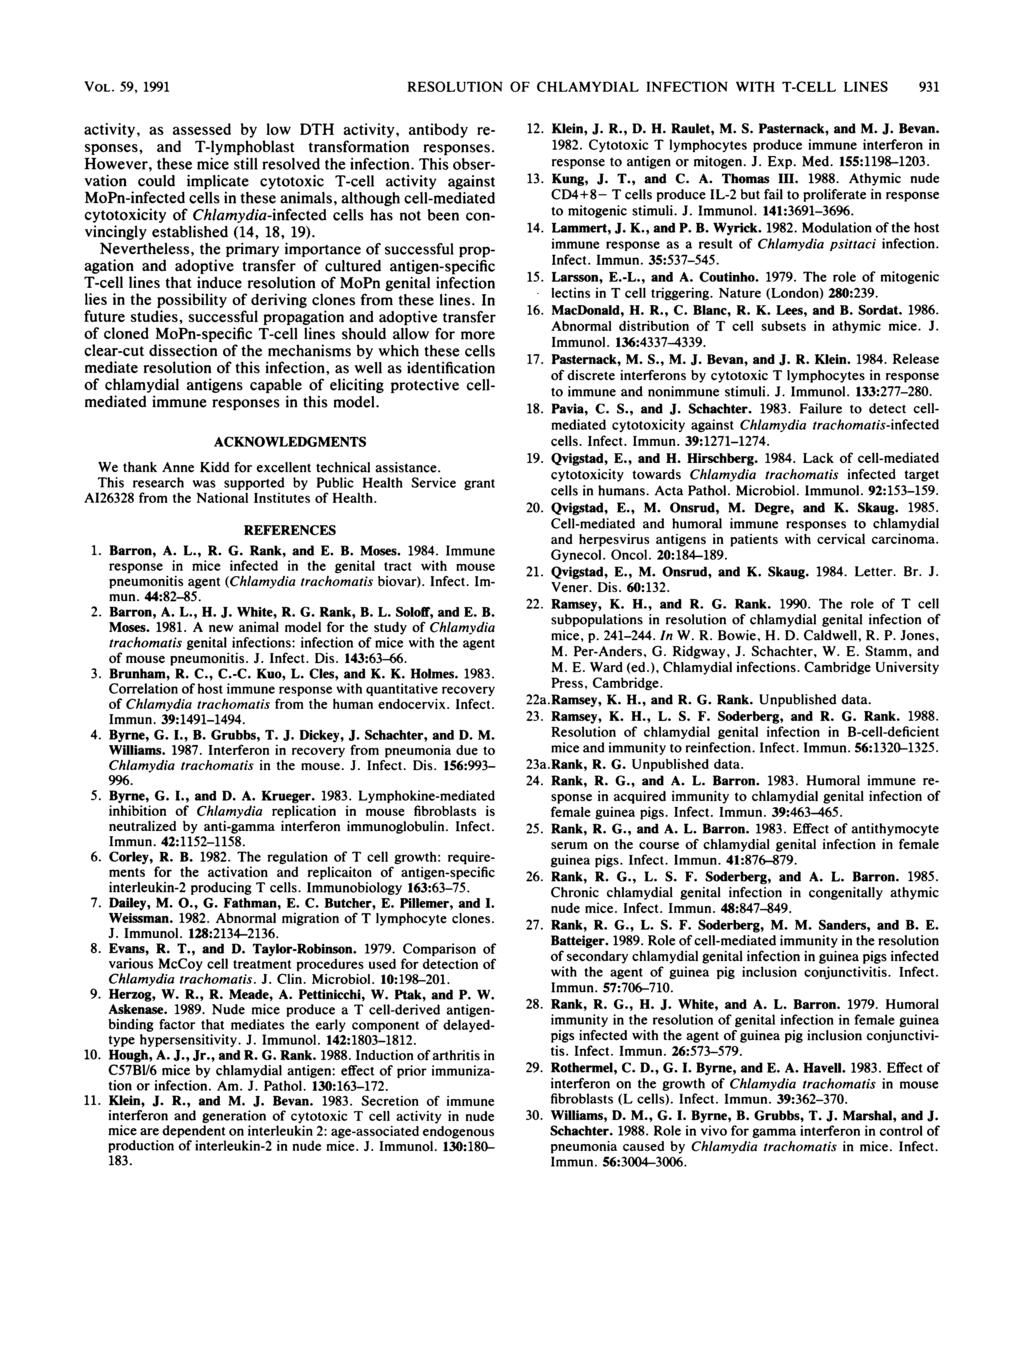 VOL. 59, 1991 RESOLUTION OF CHLAMYDIAL INFECTION WITH T-CELL LINES 931 activity, as assessed by low DTH activity, antibody responses, and T-lymphoblast transformation responses.